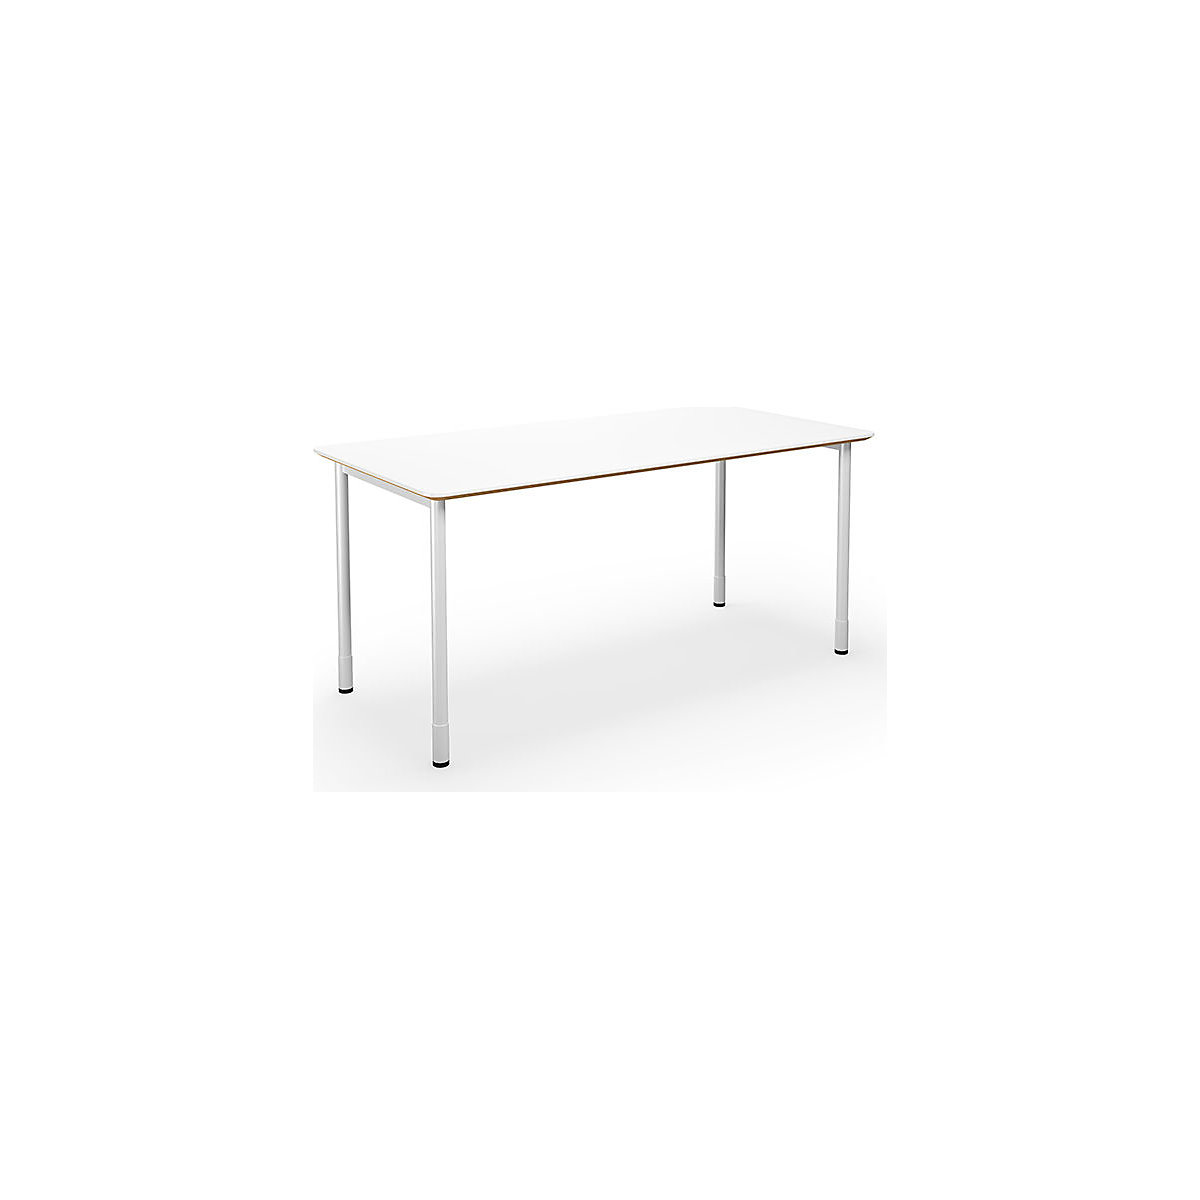 DUO-C Trend multi-purpose desk, straight tabletop, rounded corners, WxD 1400 x 800 mm, white, white-1